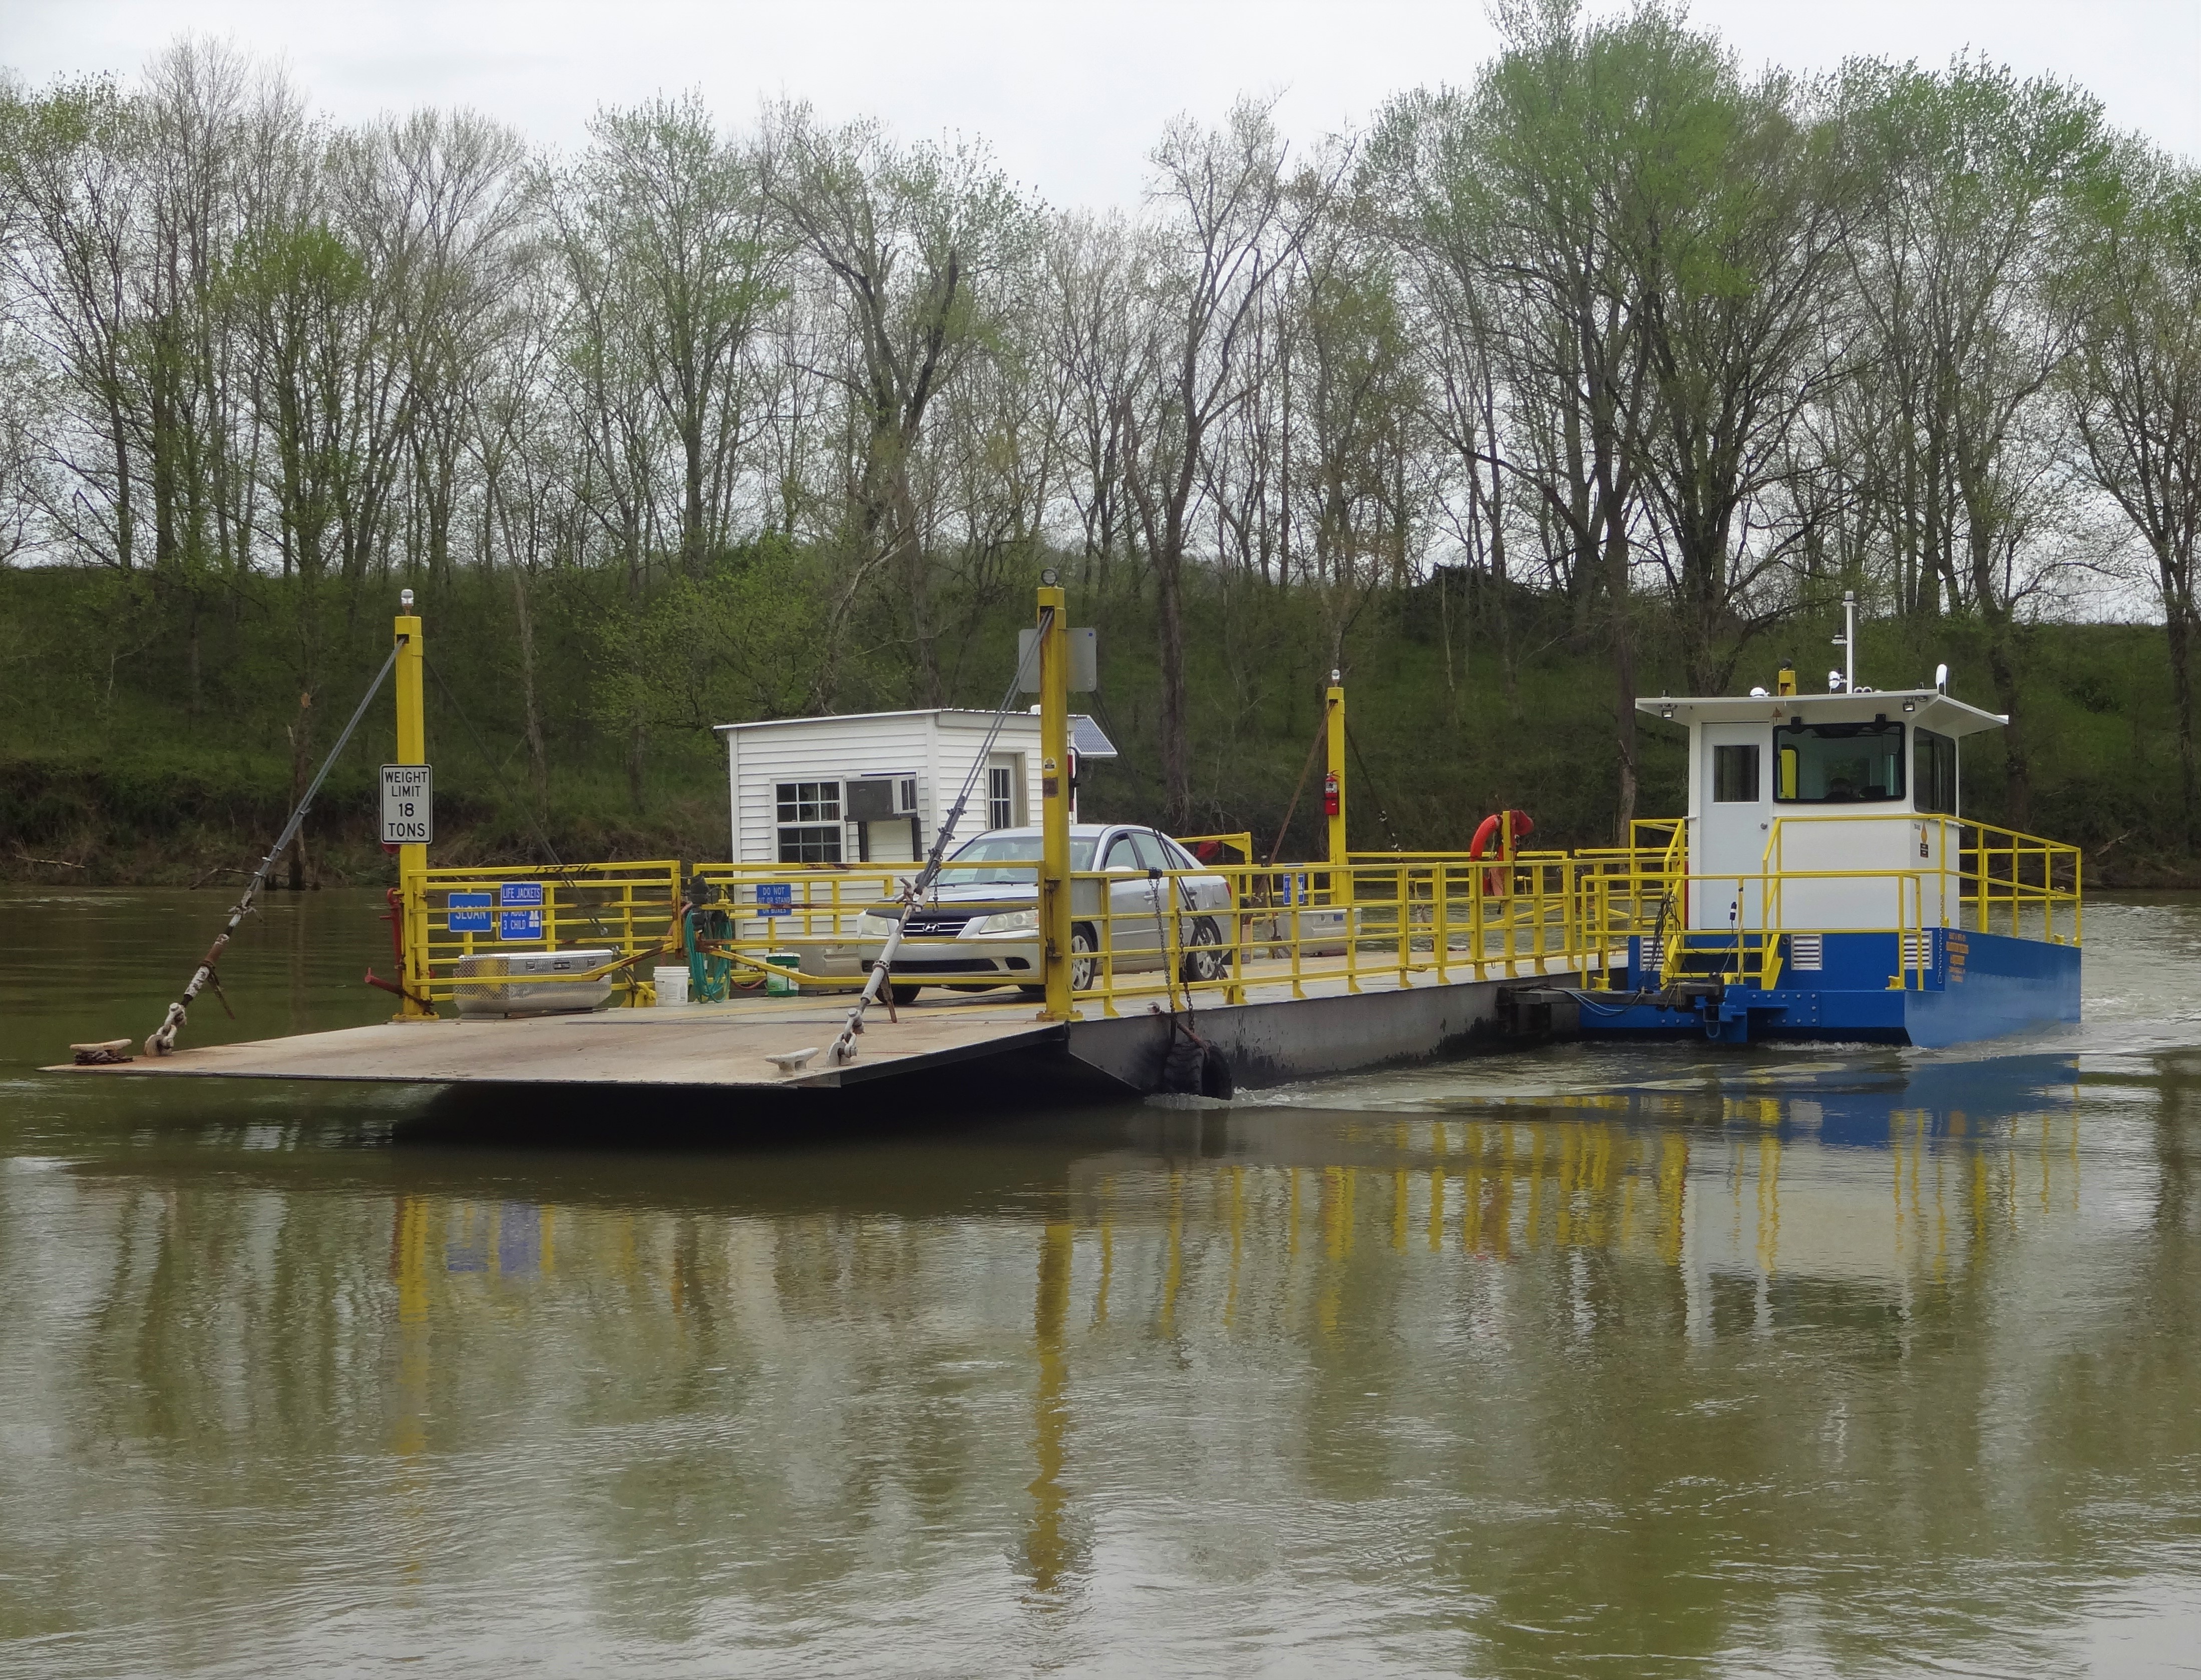 Turkey Neck Bend ferryboat ferrying vehicles across the Cumberland river